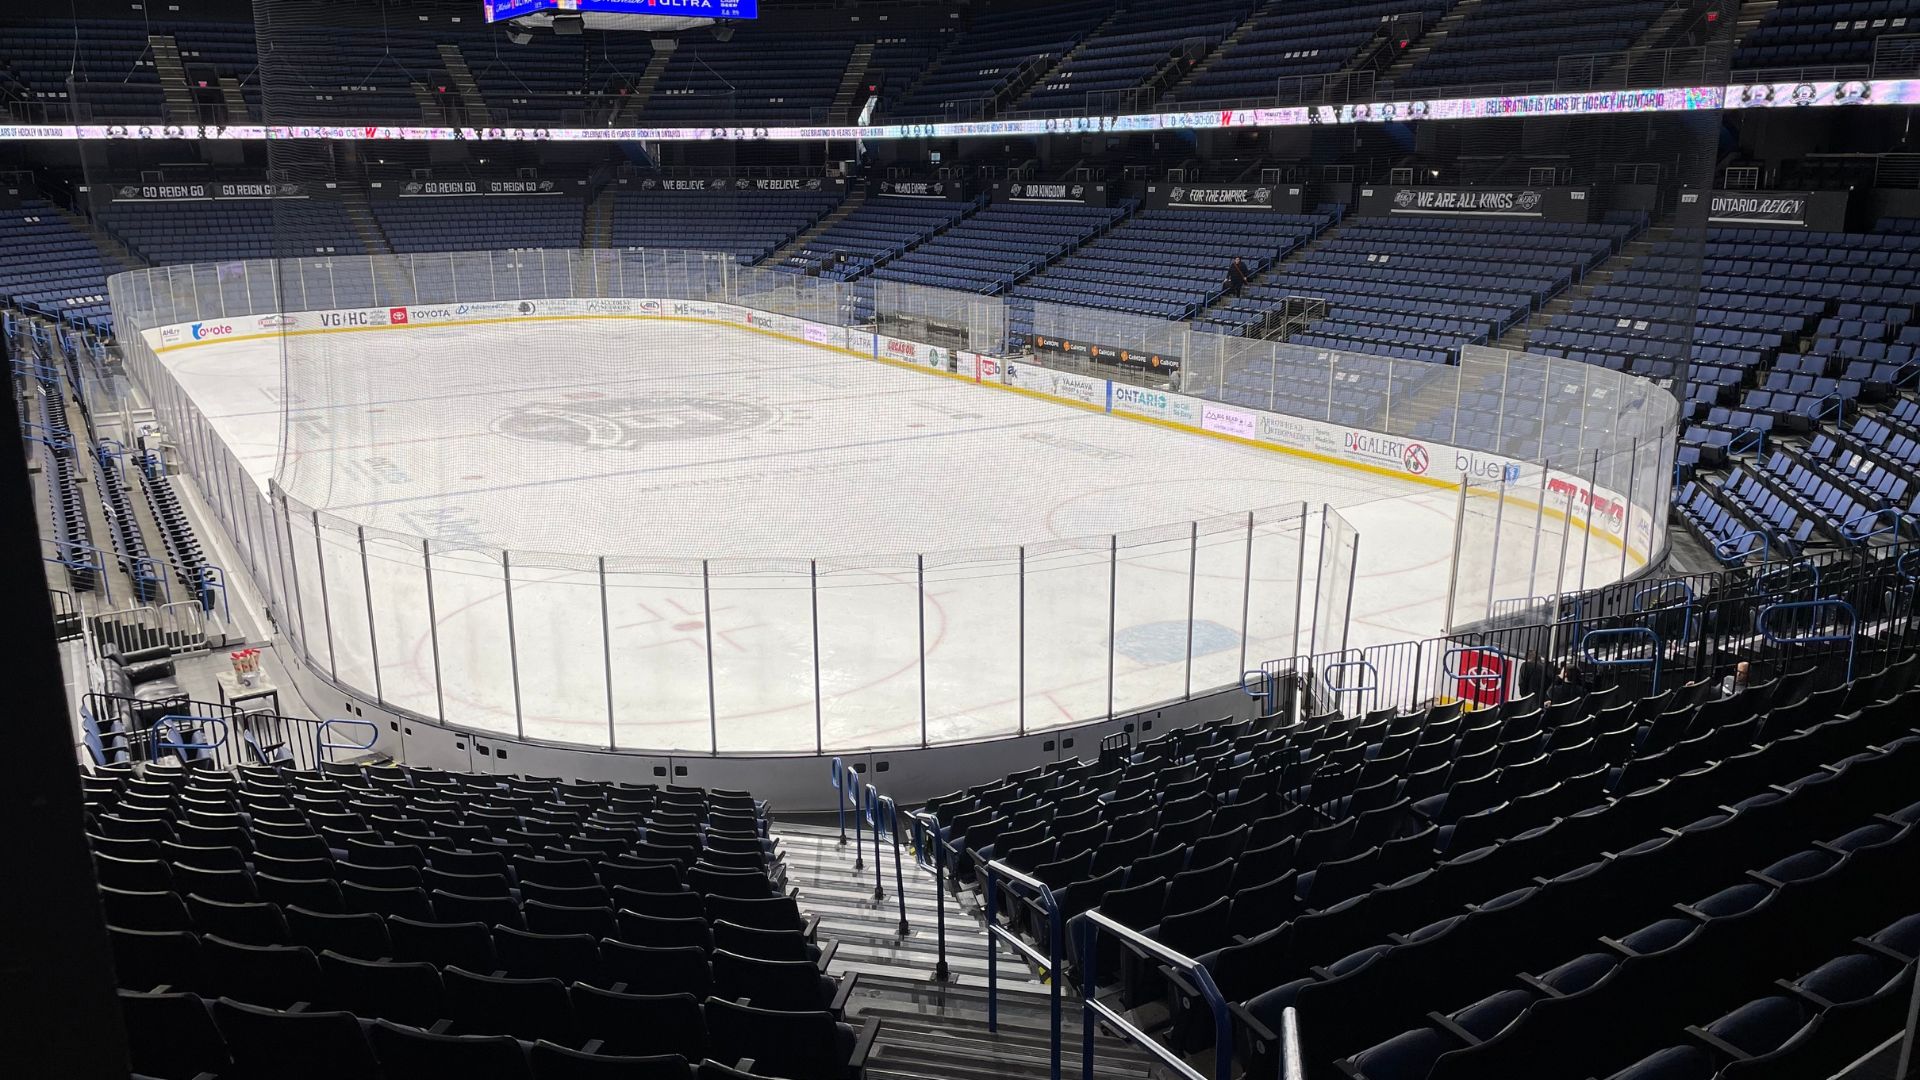 An image from the 100 level at the Ontario Reign’s hockey rink in Ontario, CA.